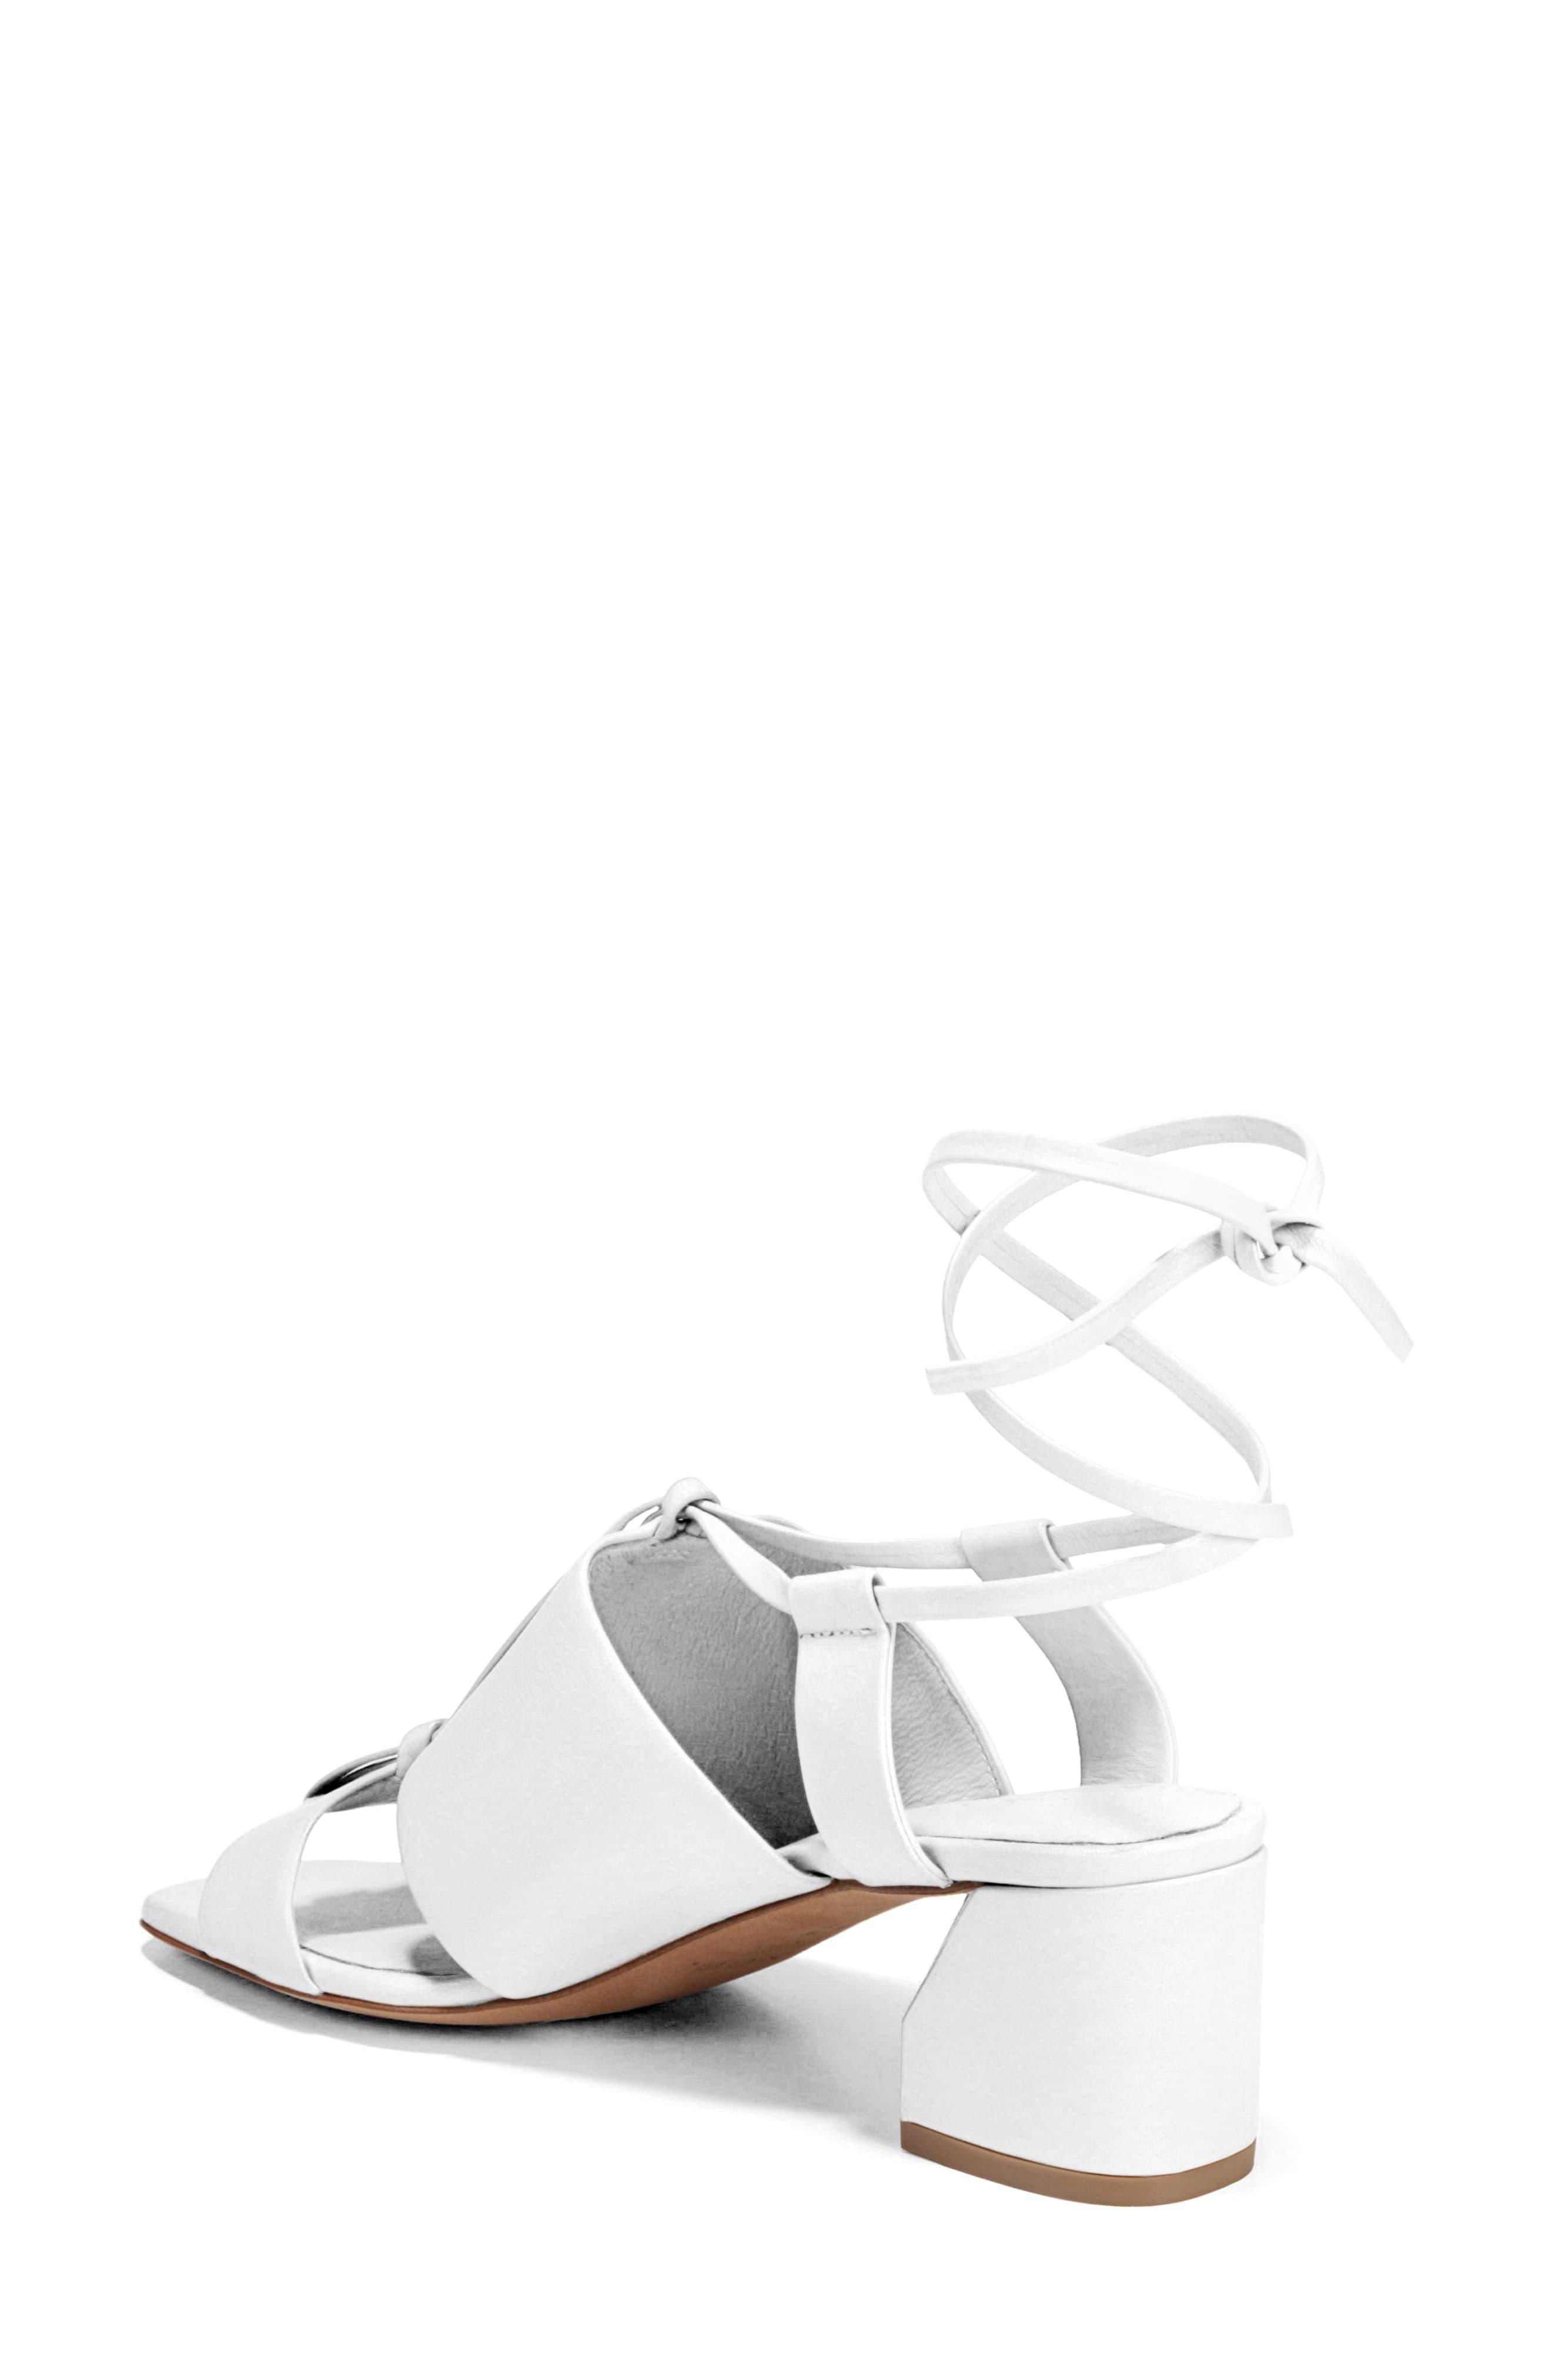 Vince Women's Dunaway Ankle Tie Sandals in White - Lyst